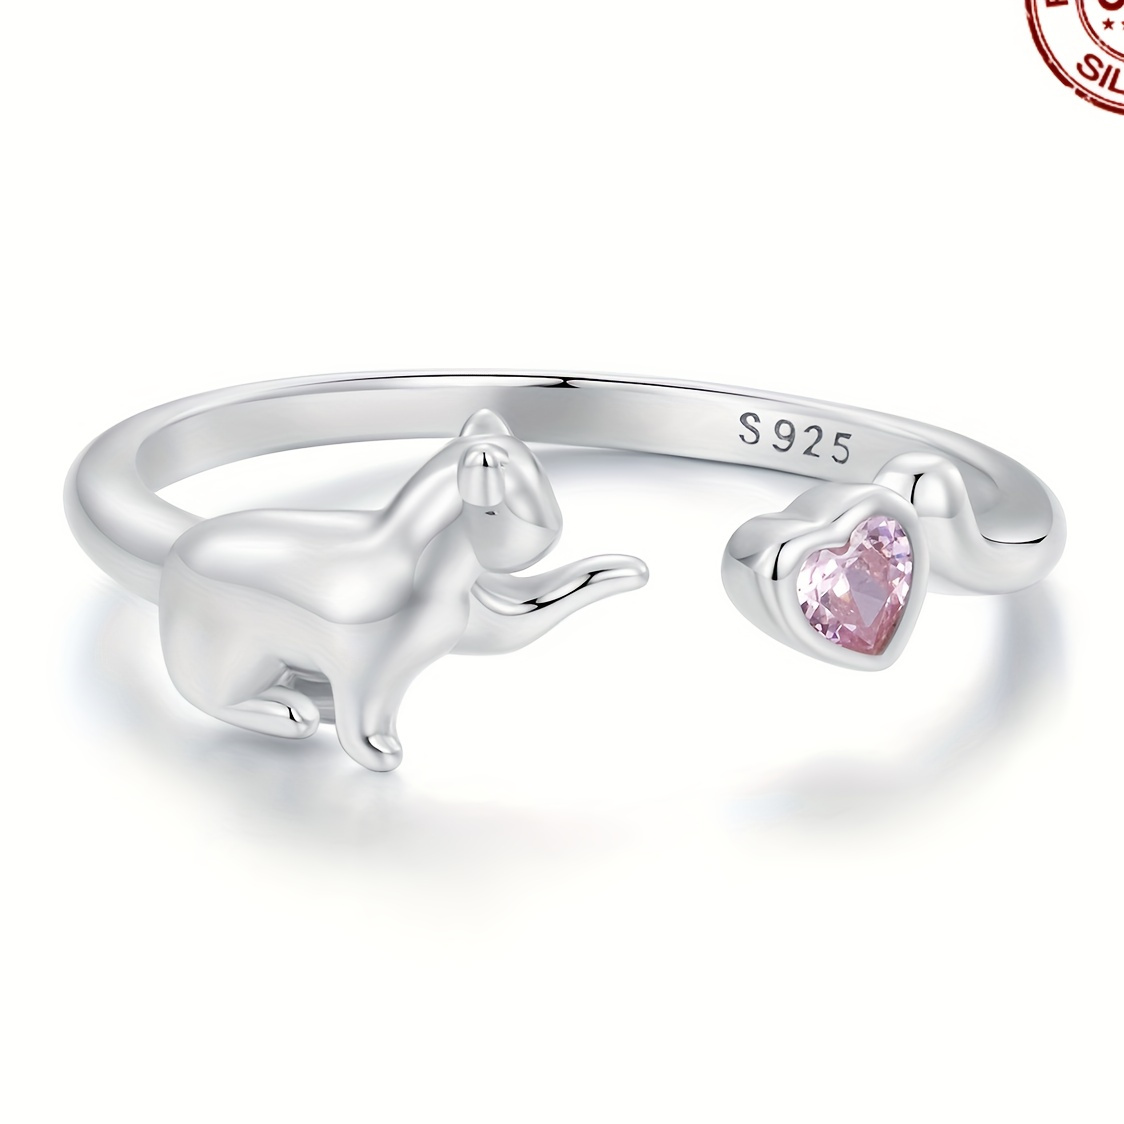 

925 Sterling Silver Cute Animal Cat Ring With Pink Heart Detail, Hypoallergenic Elegant Romantic Jewelry Gift For Women, No Power Required